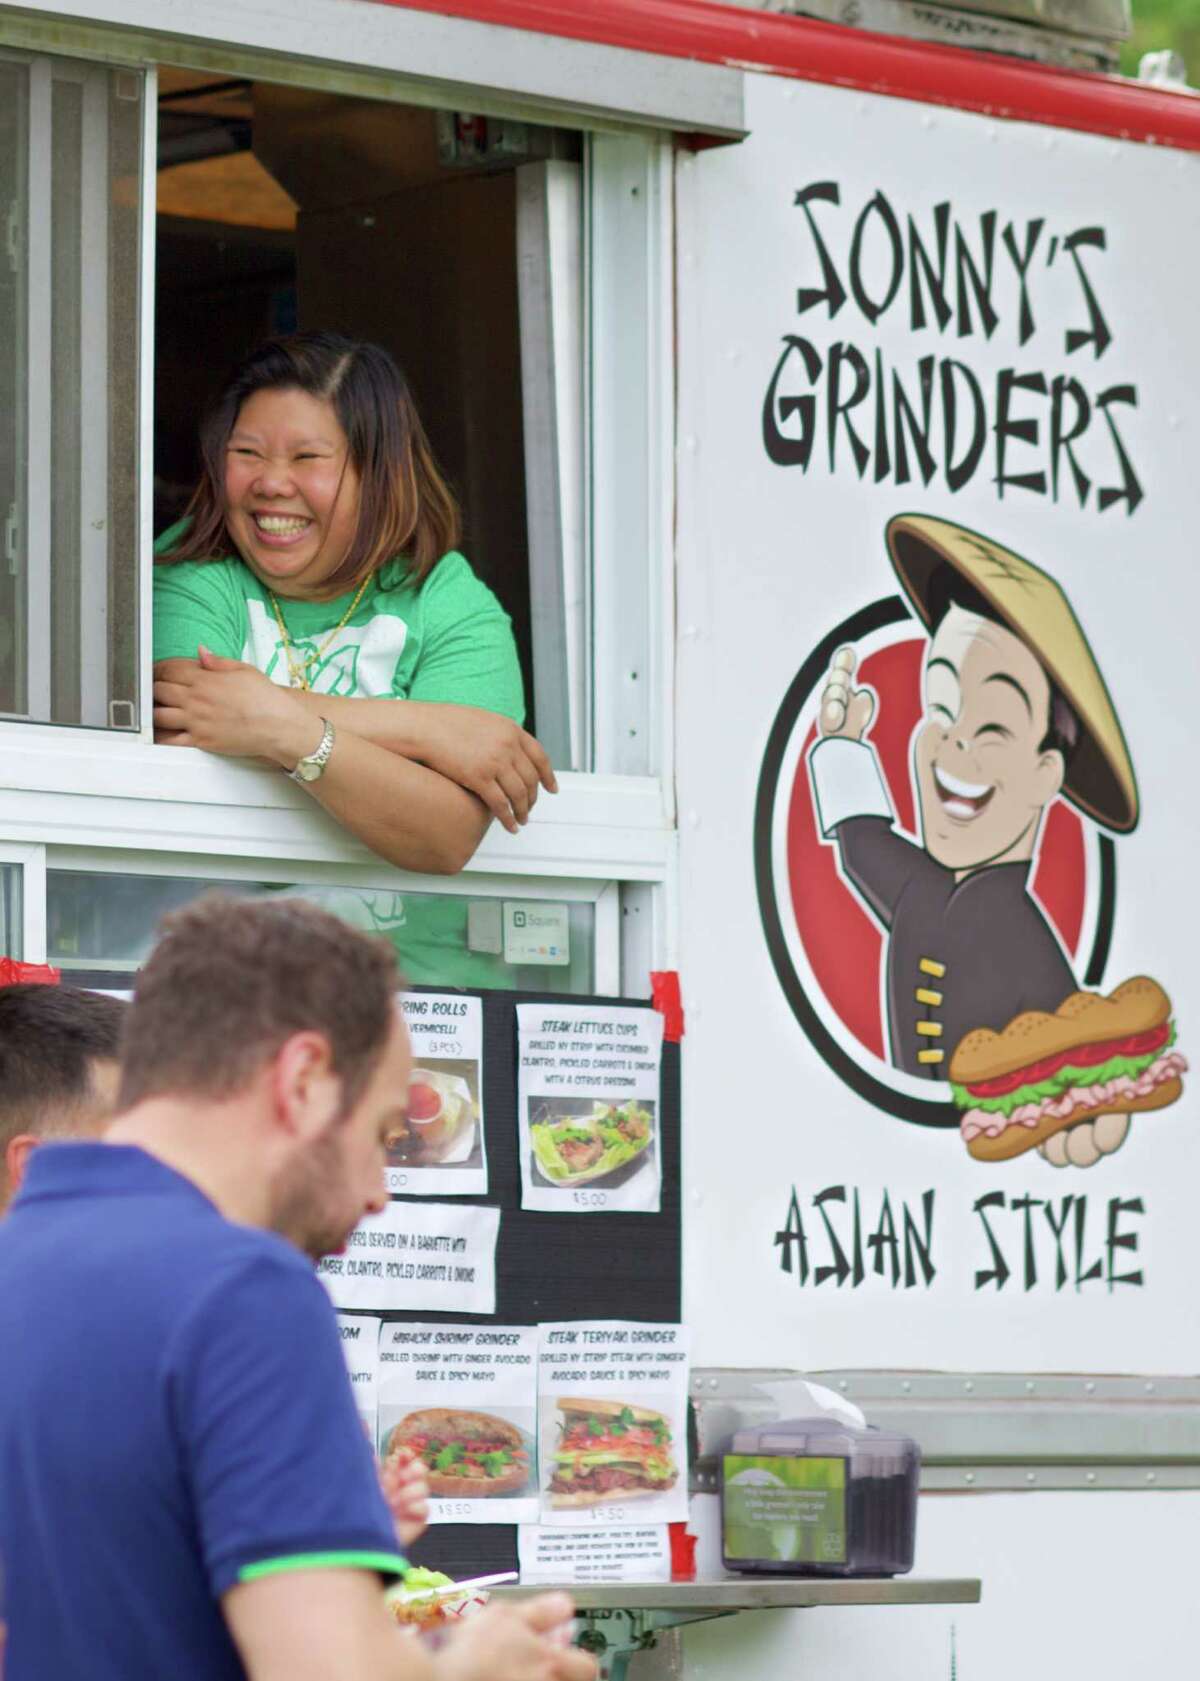 Jithravan Julsuconth, from Norwalk, gives service with a smile from her food truck "Sonny's Grinders". The 20th annual Teddy Bear Festival hosted by the Woman?’s Club of Greater New Milford took place on the town green on Saturday, June 4th from 10 to 3.